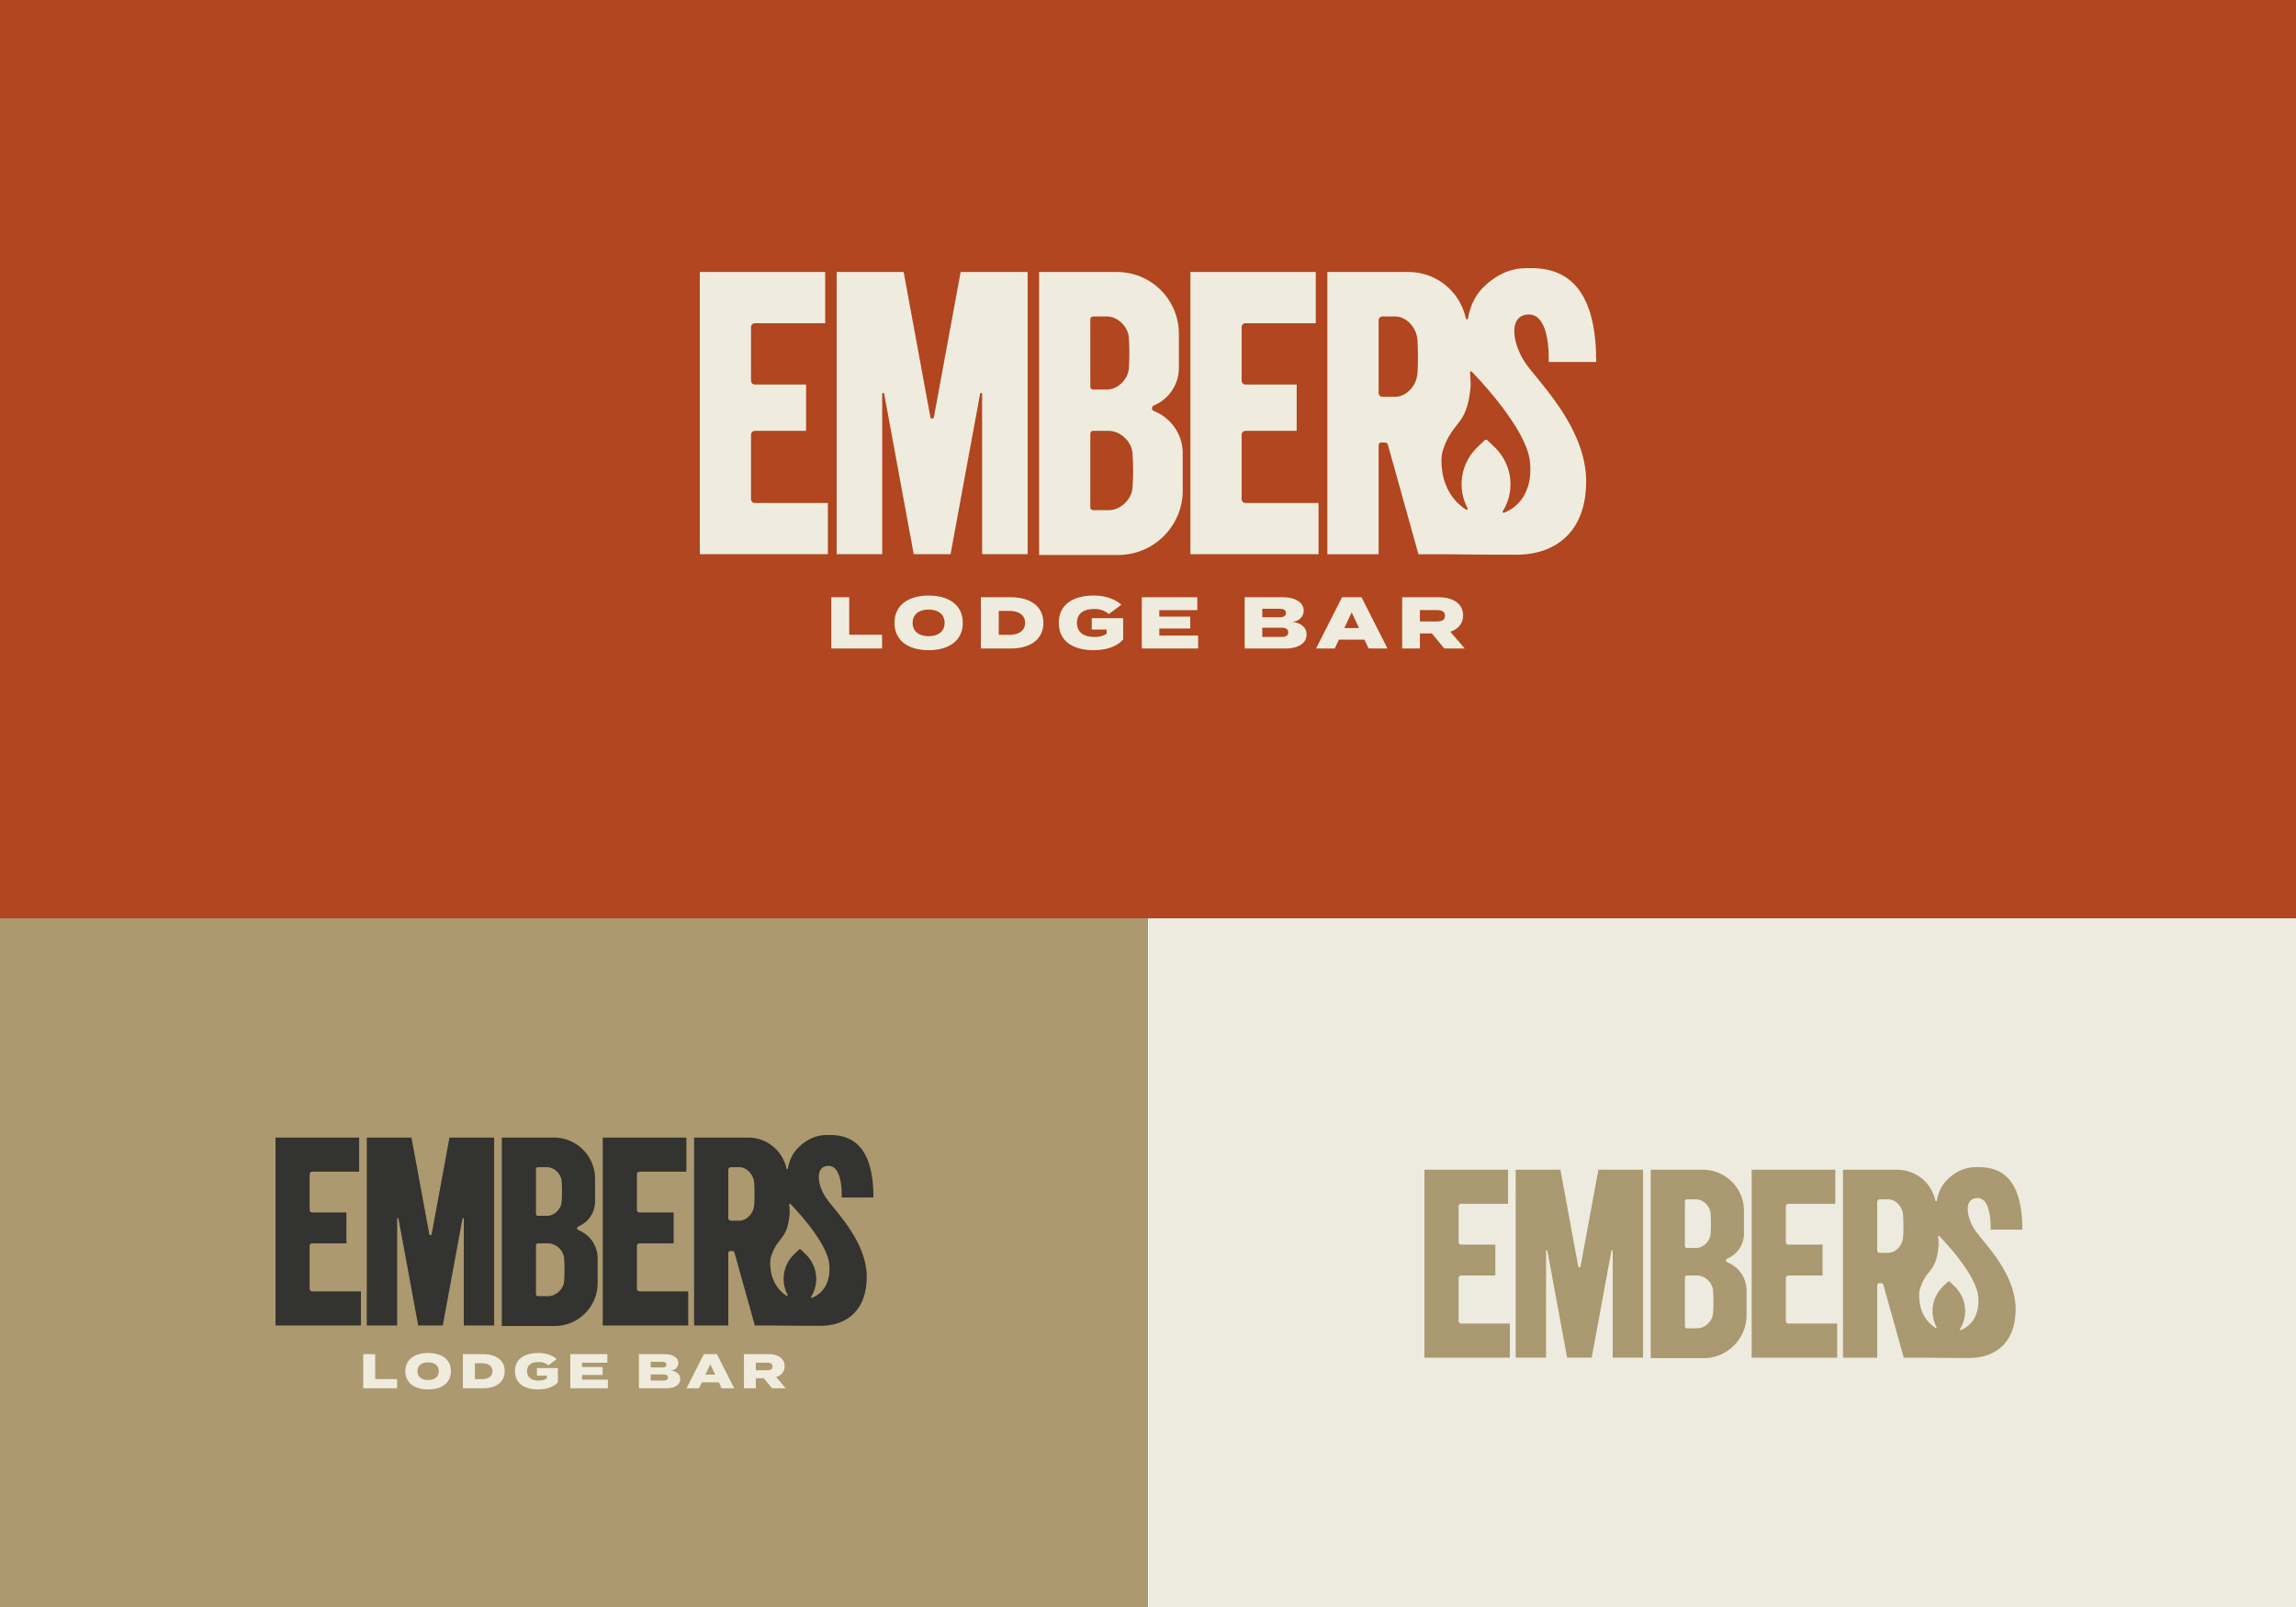 Embers logo system, with custom logotype featuring a flame.